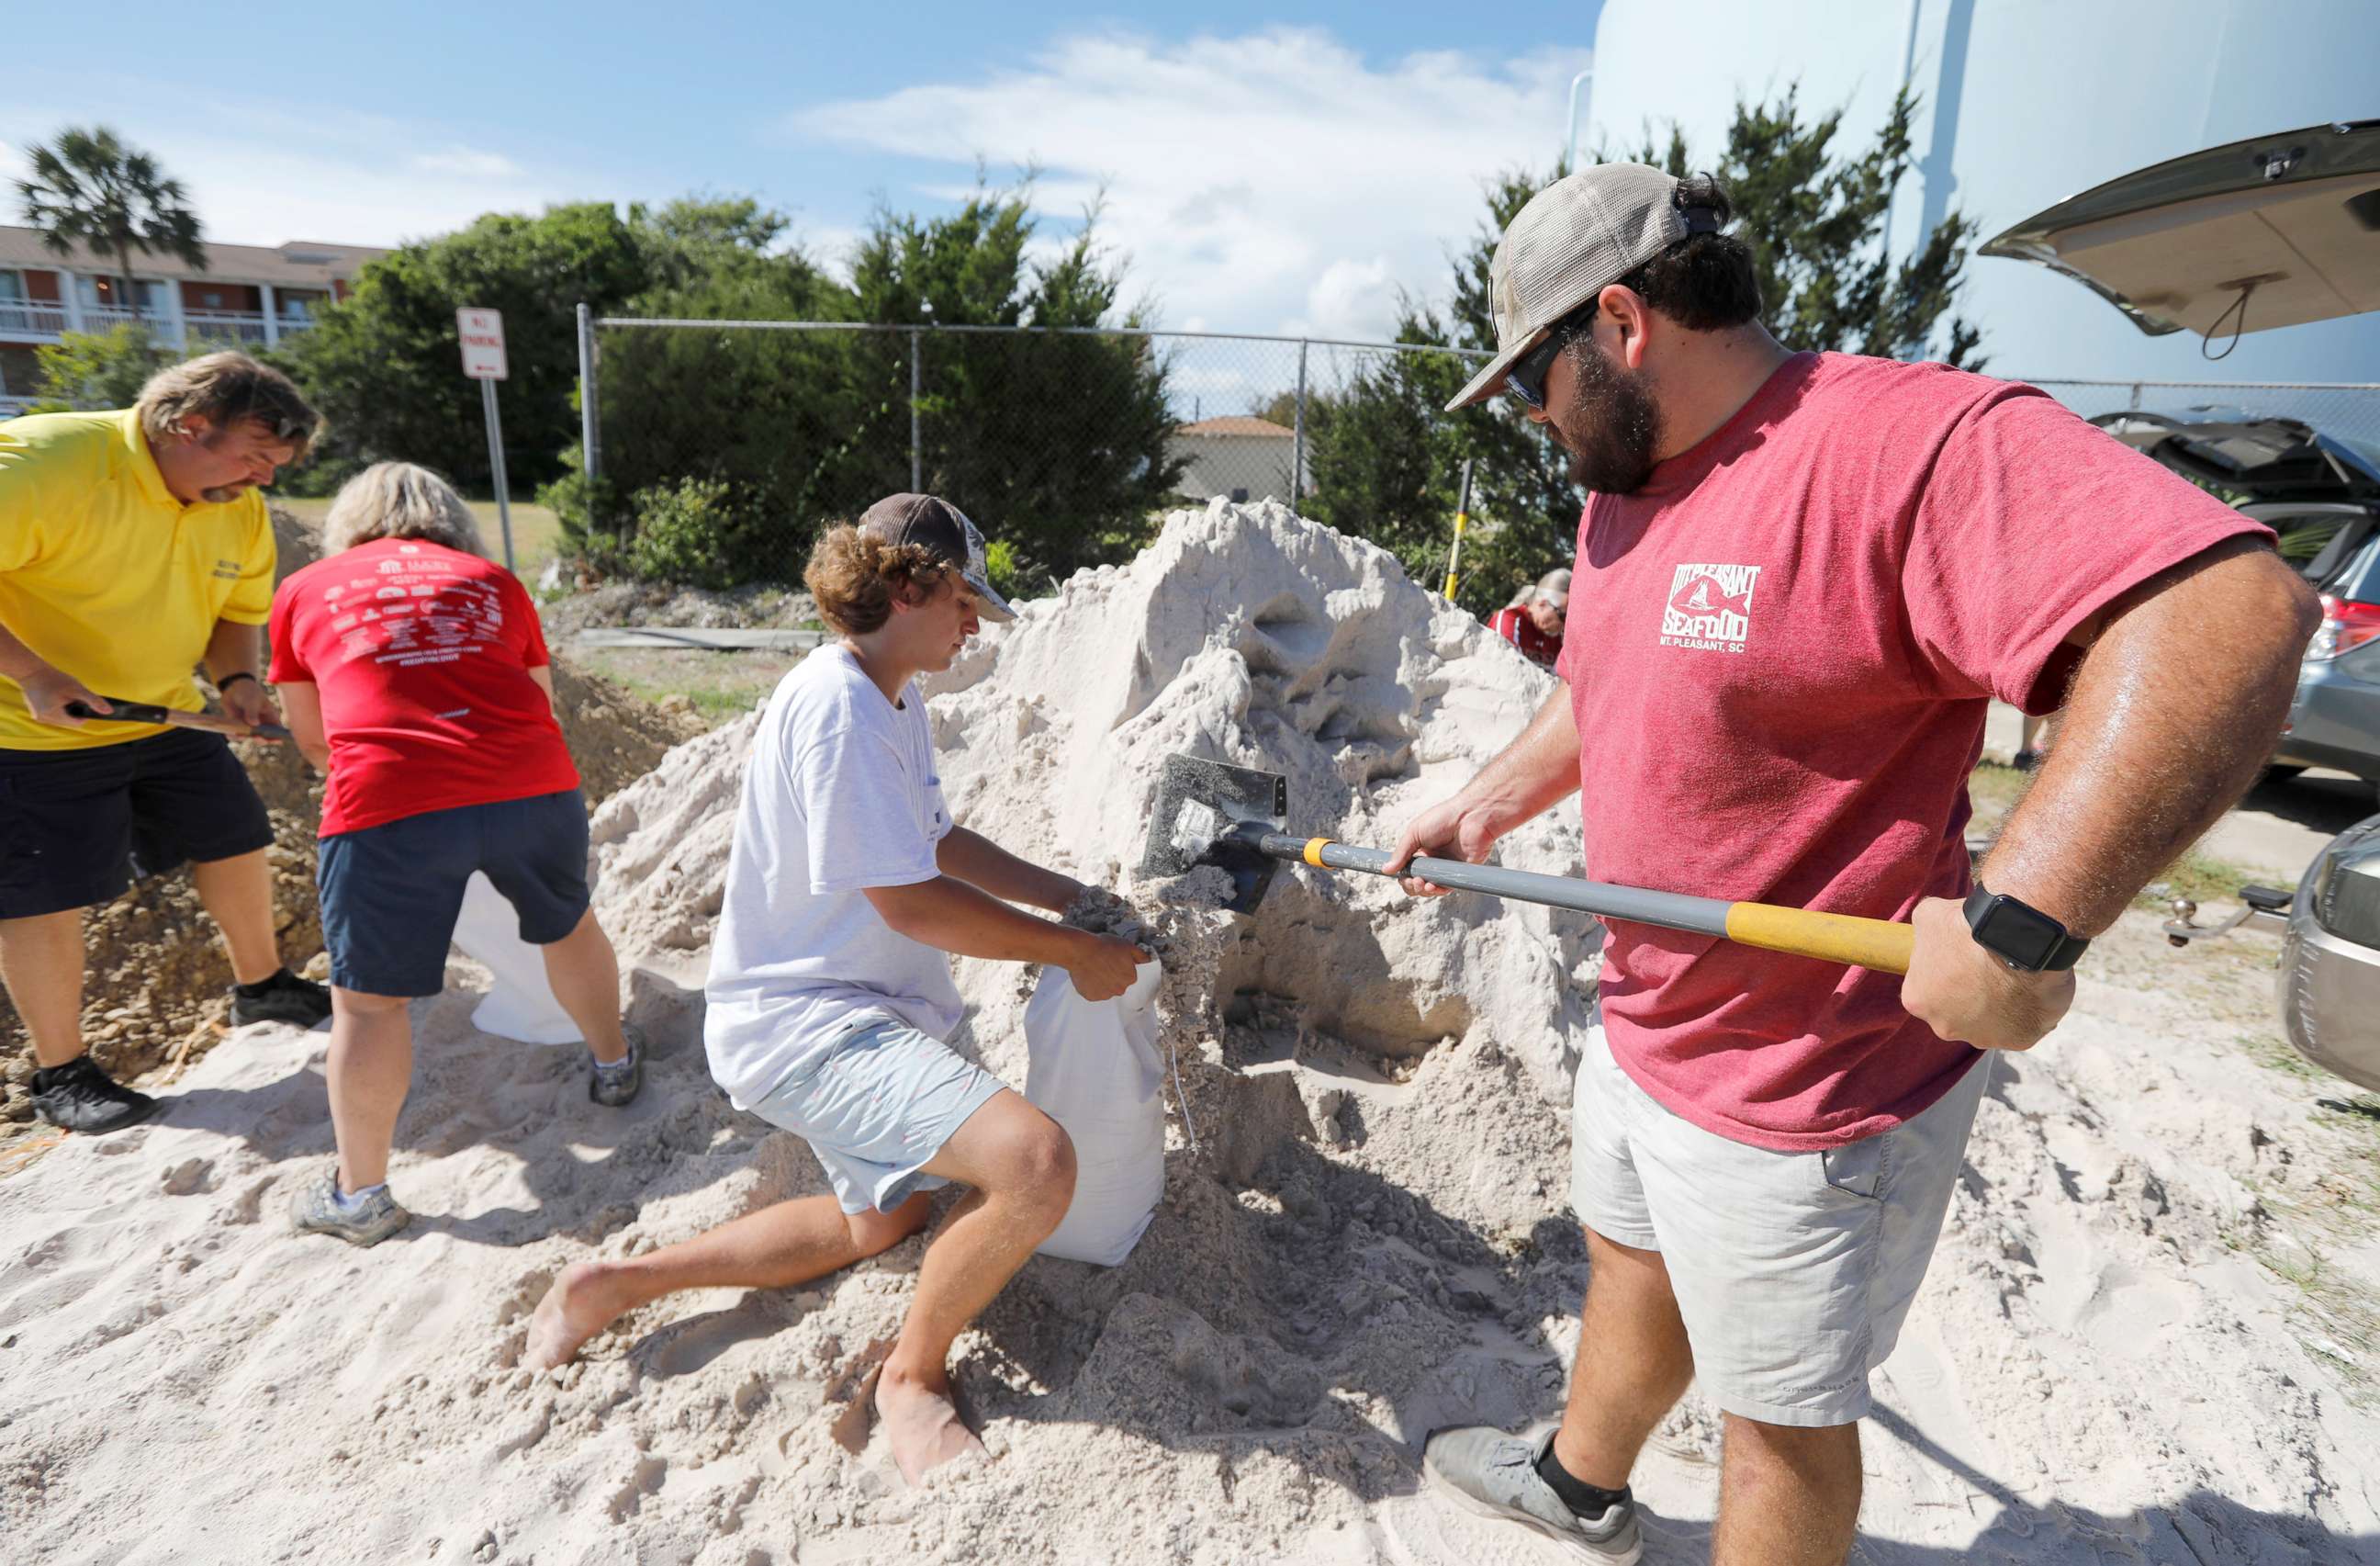 PHOTO: Walker Townsend, right, fills a sand bag while Dalton Trout, center, holds the bag at the Isle of Palms municipal lot where the city was giving away free sand in preparation for Hurricane Florence, Sept. 10, 2018.